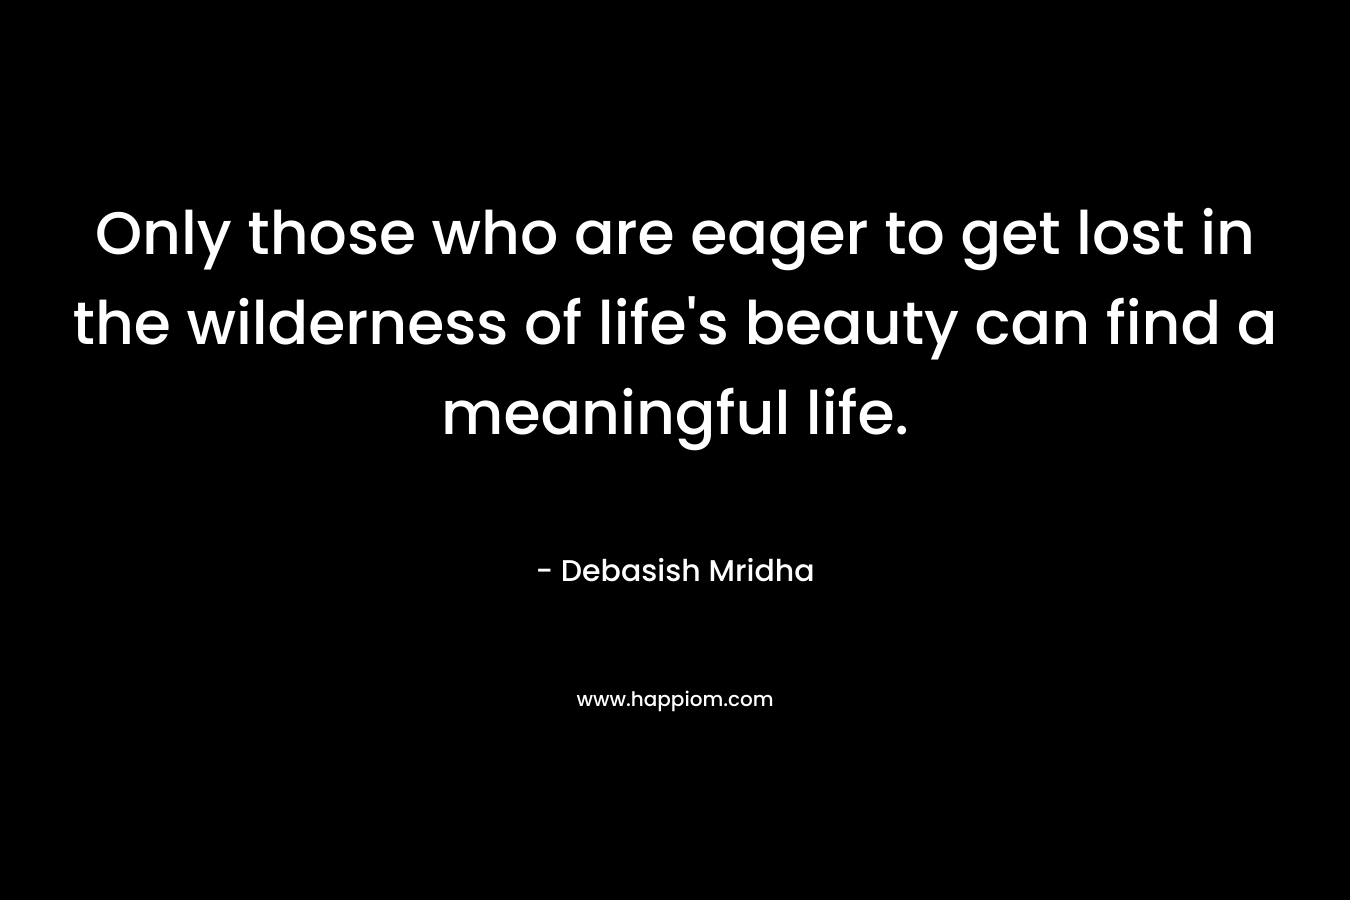 Only those who are eager to get lost in the wilderness of life's beauty can find a meaningful life.